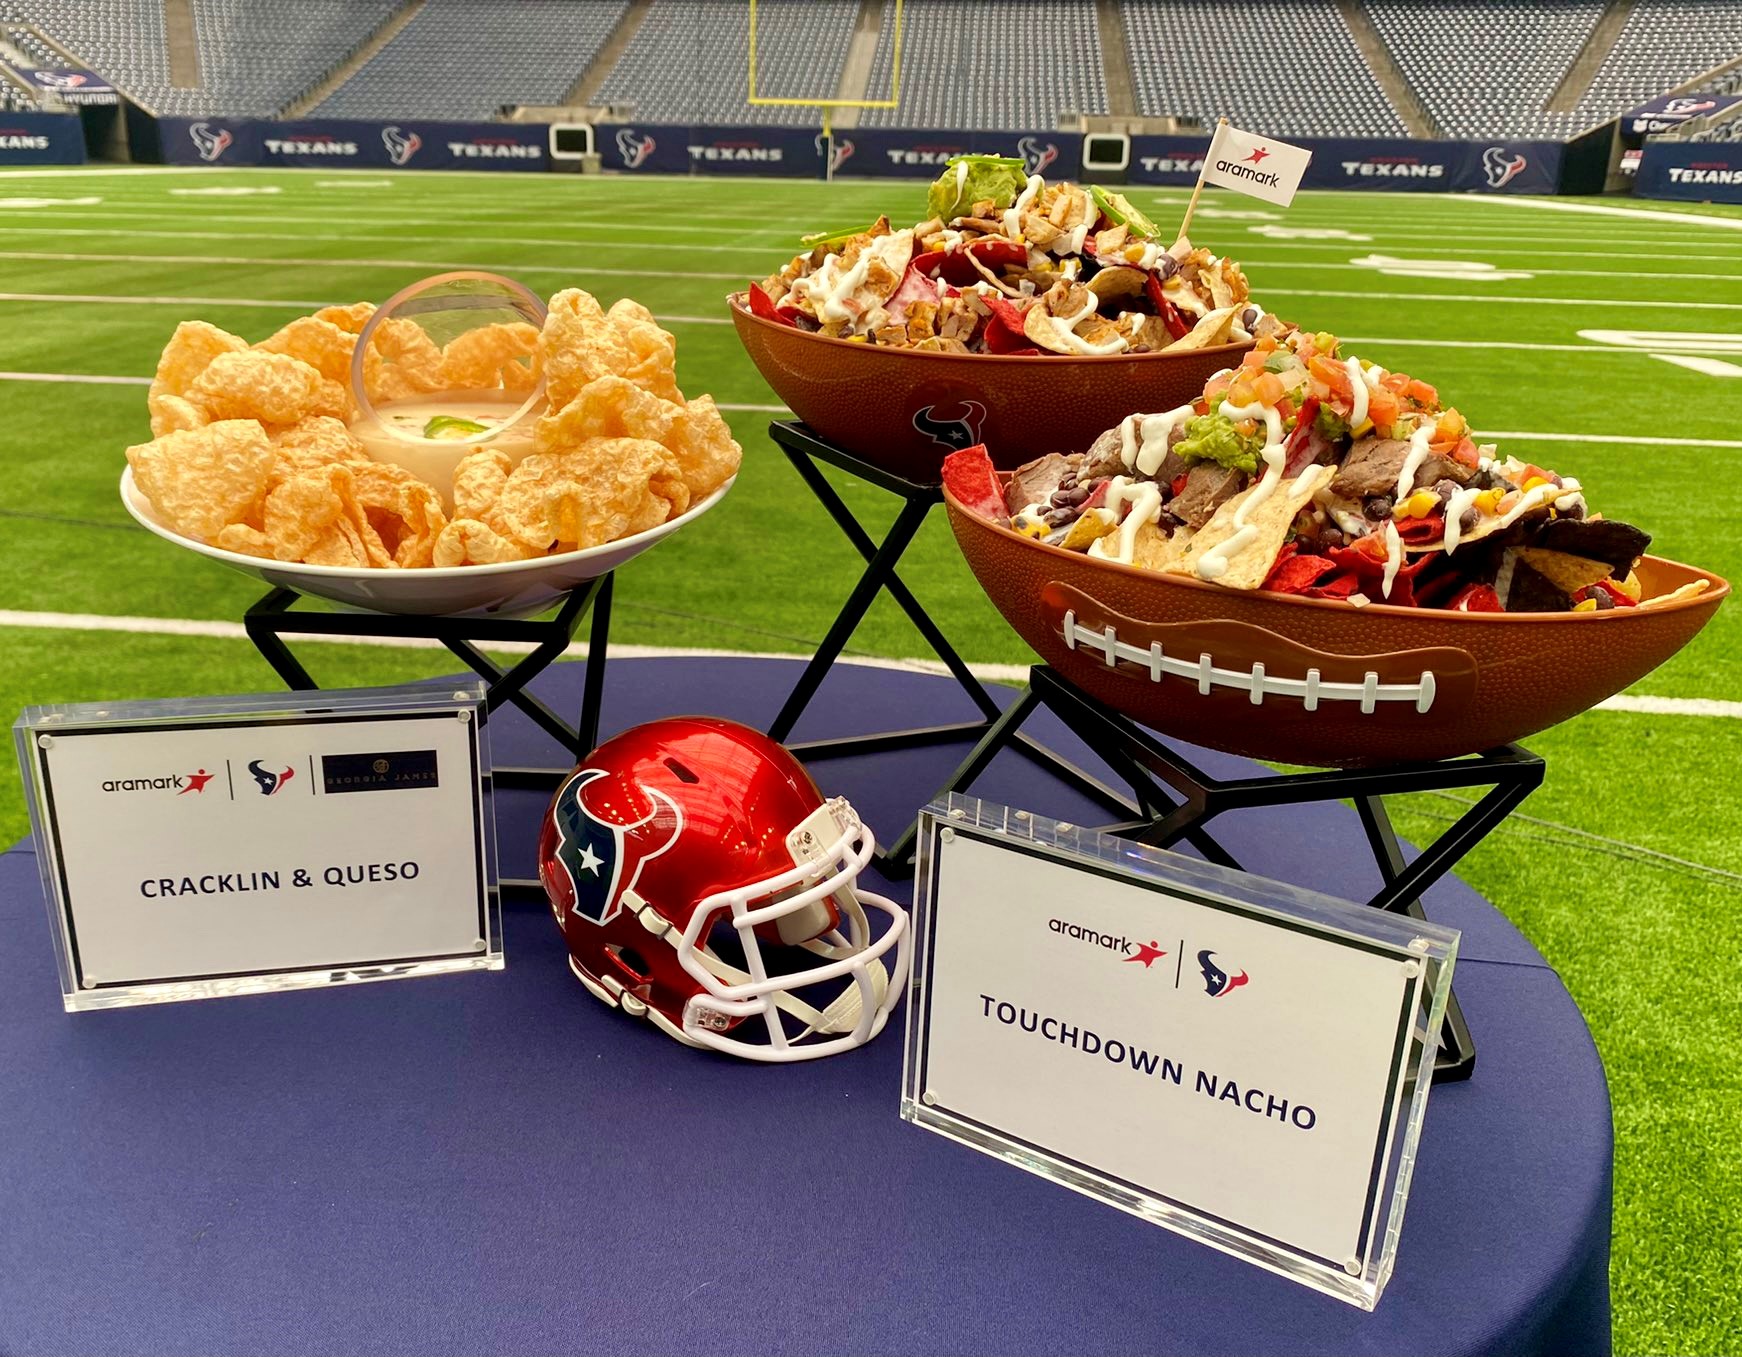 Texans' new concessions stand snacks include cracklins and queso,  injectable churros